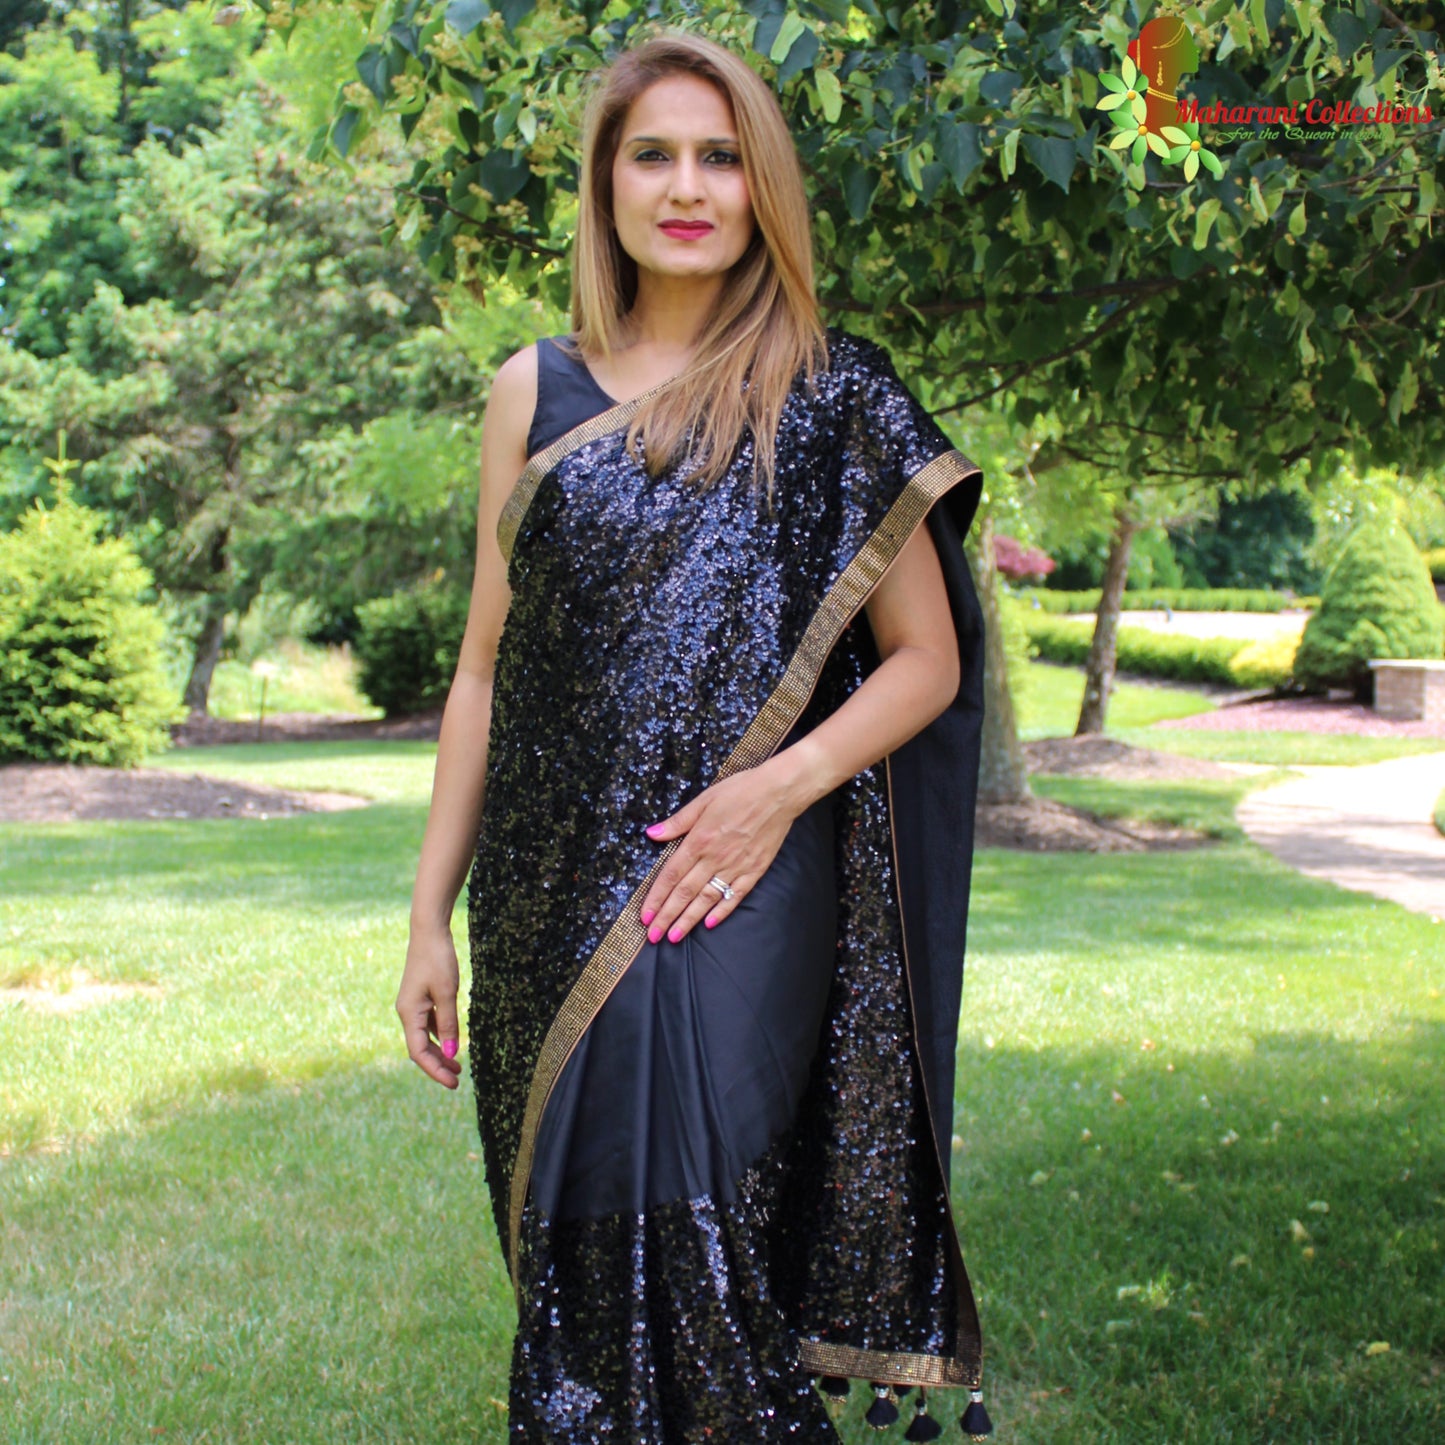 Maharani's Party Wear Georgette Sequins Saree - Black with Golden Border (with Stitched Blouse and Petticoat)